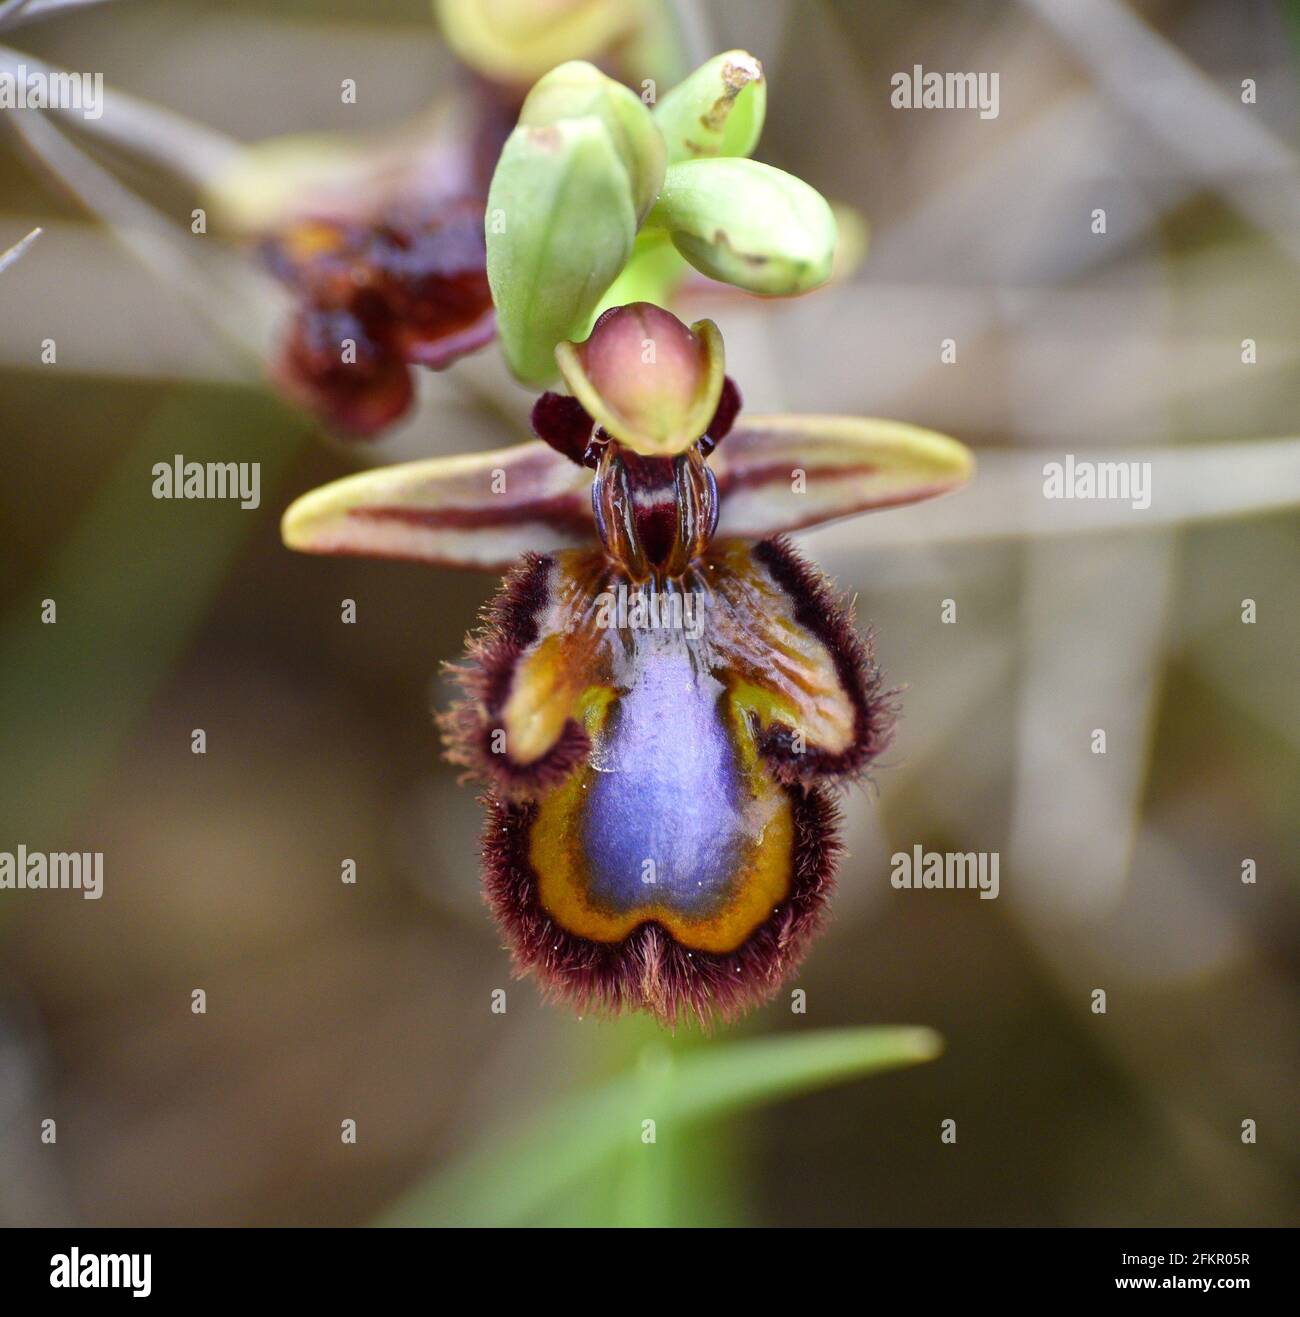 Venus Mirror Orchid (Ophrys speculum). Located in uncultivated meadows in Munilla, La Rioja, Spain. Stock Photo